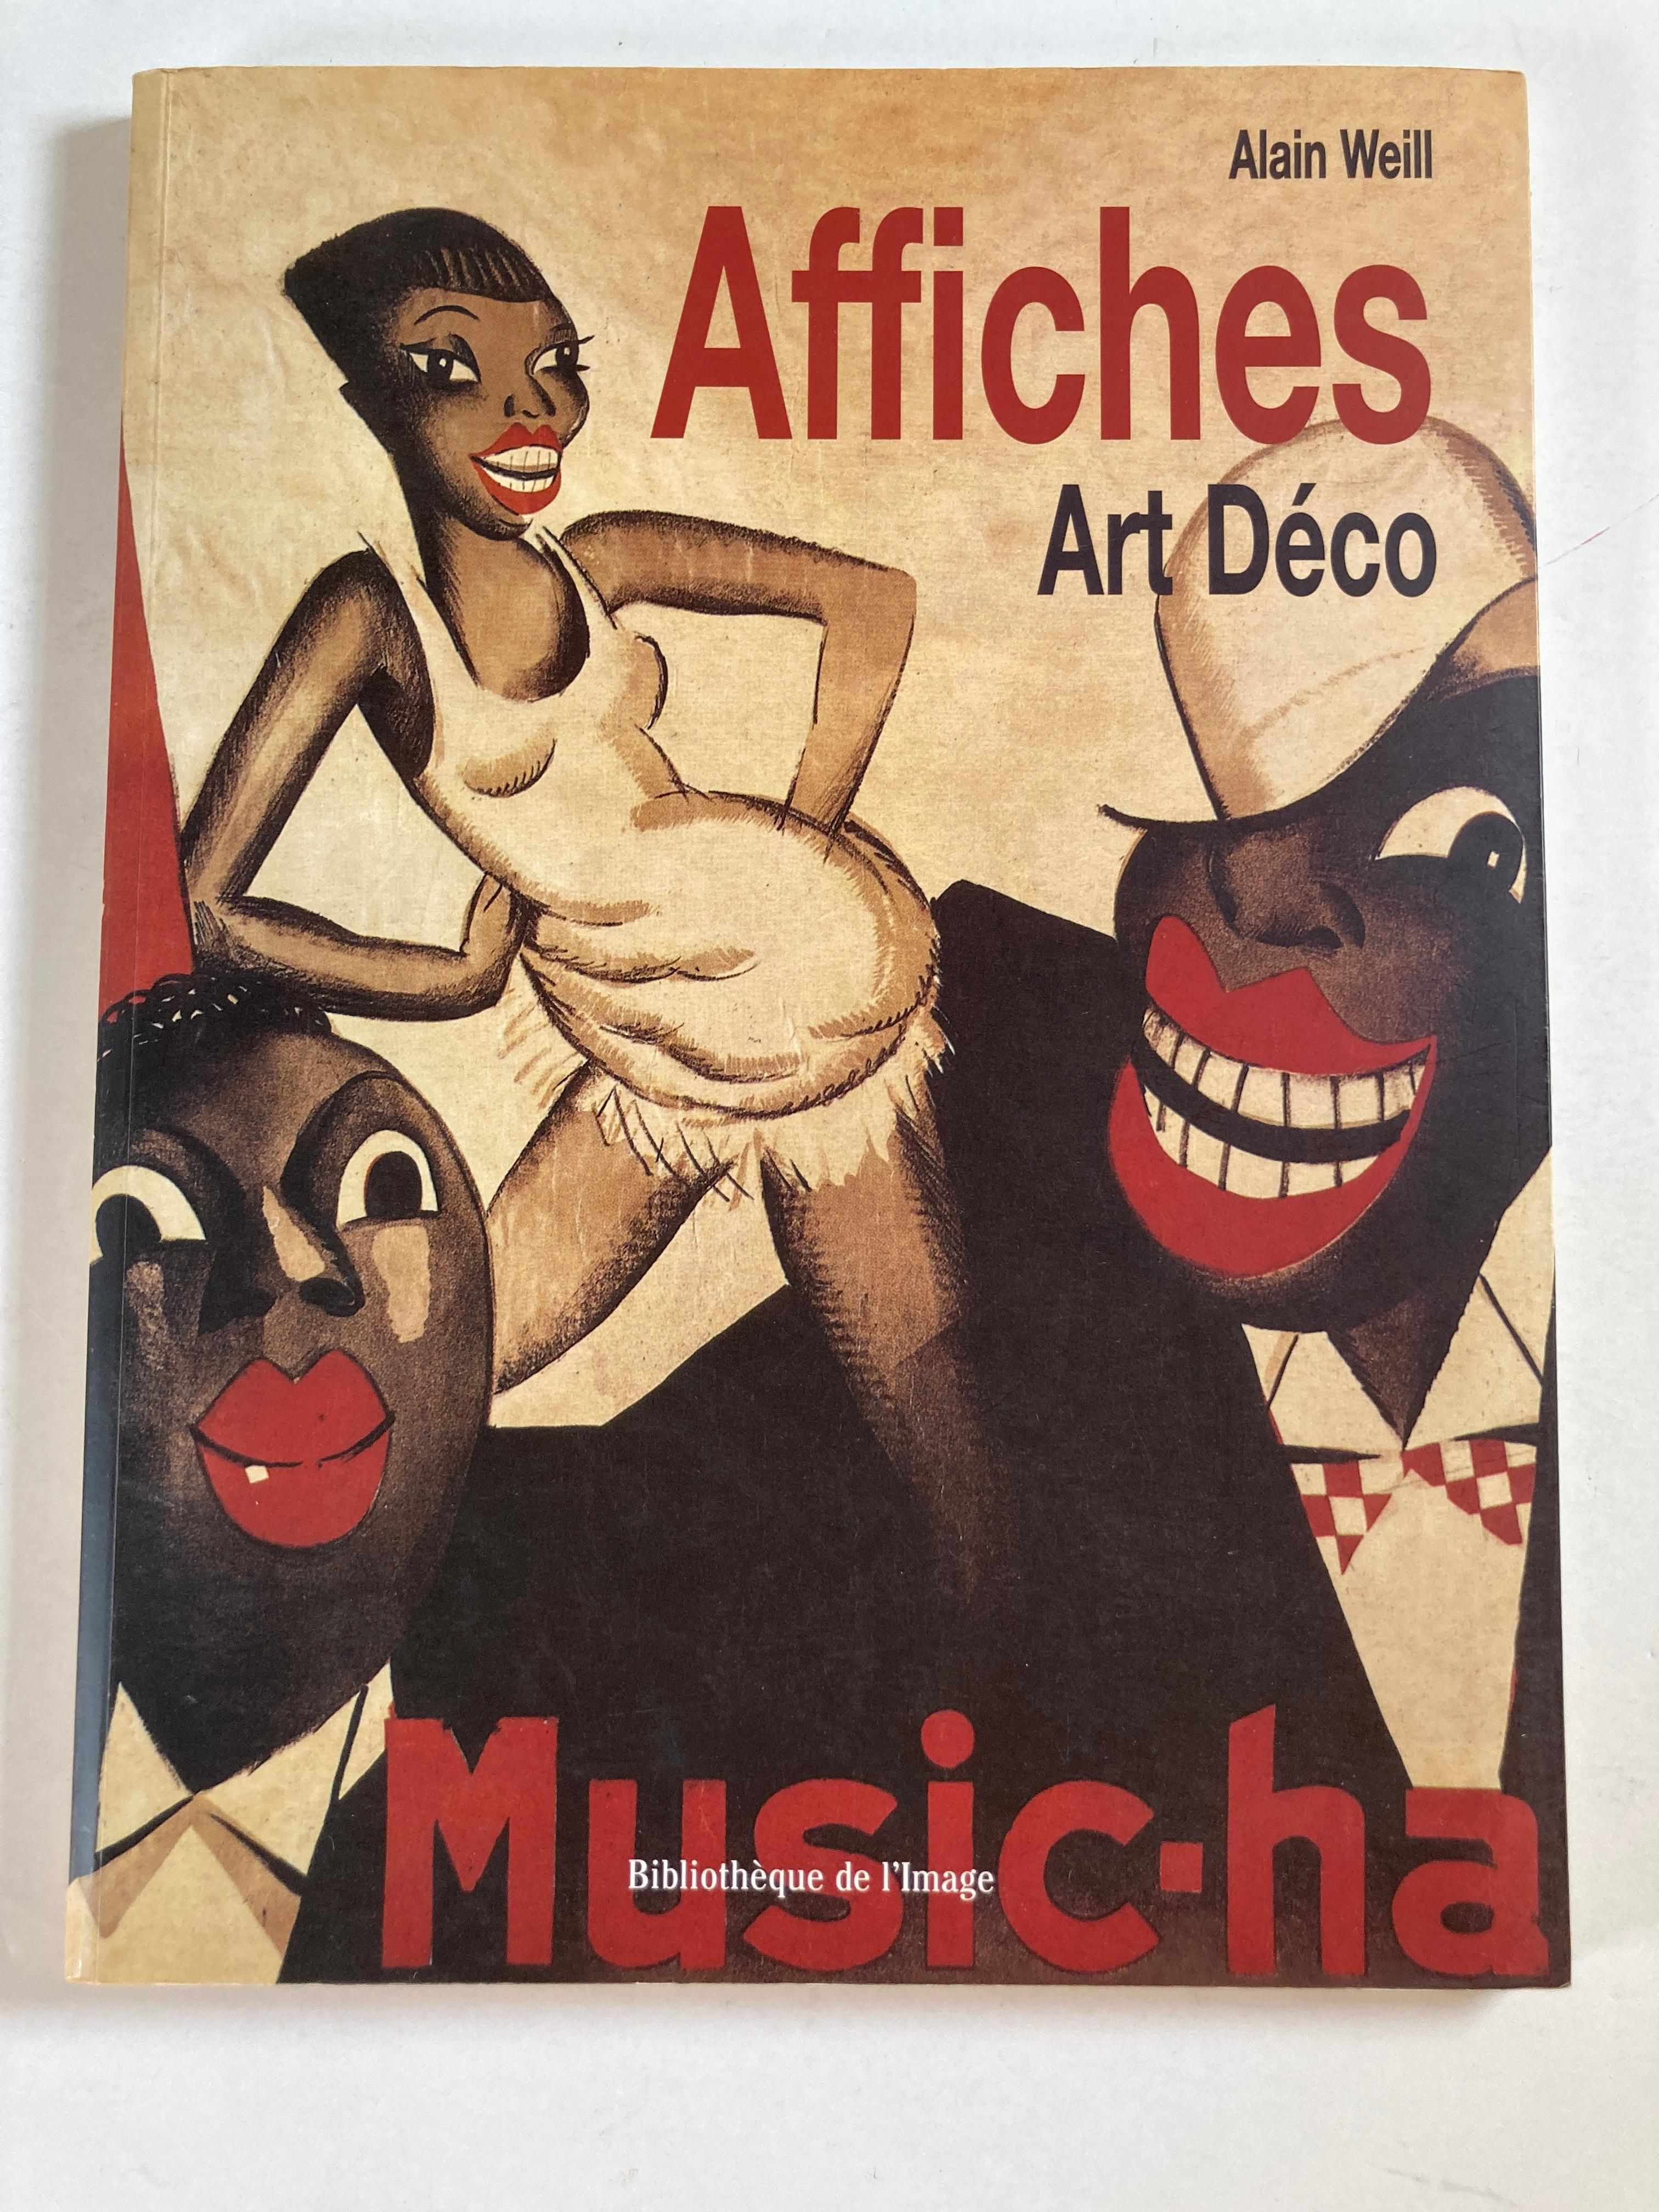 Affiches Art Deco paperback – September 1, 2001
French Edition by Alain Weill (Author)
Publisher ? : ? Art Stock (September 1, 2001)
Language ? : ? French
Paperback ? : ? 96 pages
This is a beautiful large coffee table Art Decopaperback book.
   